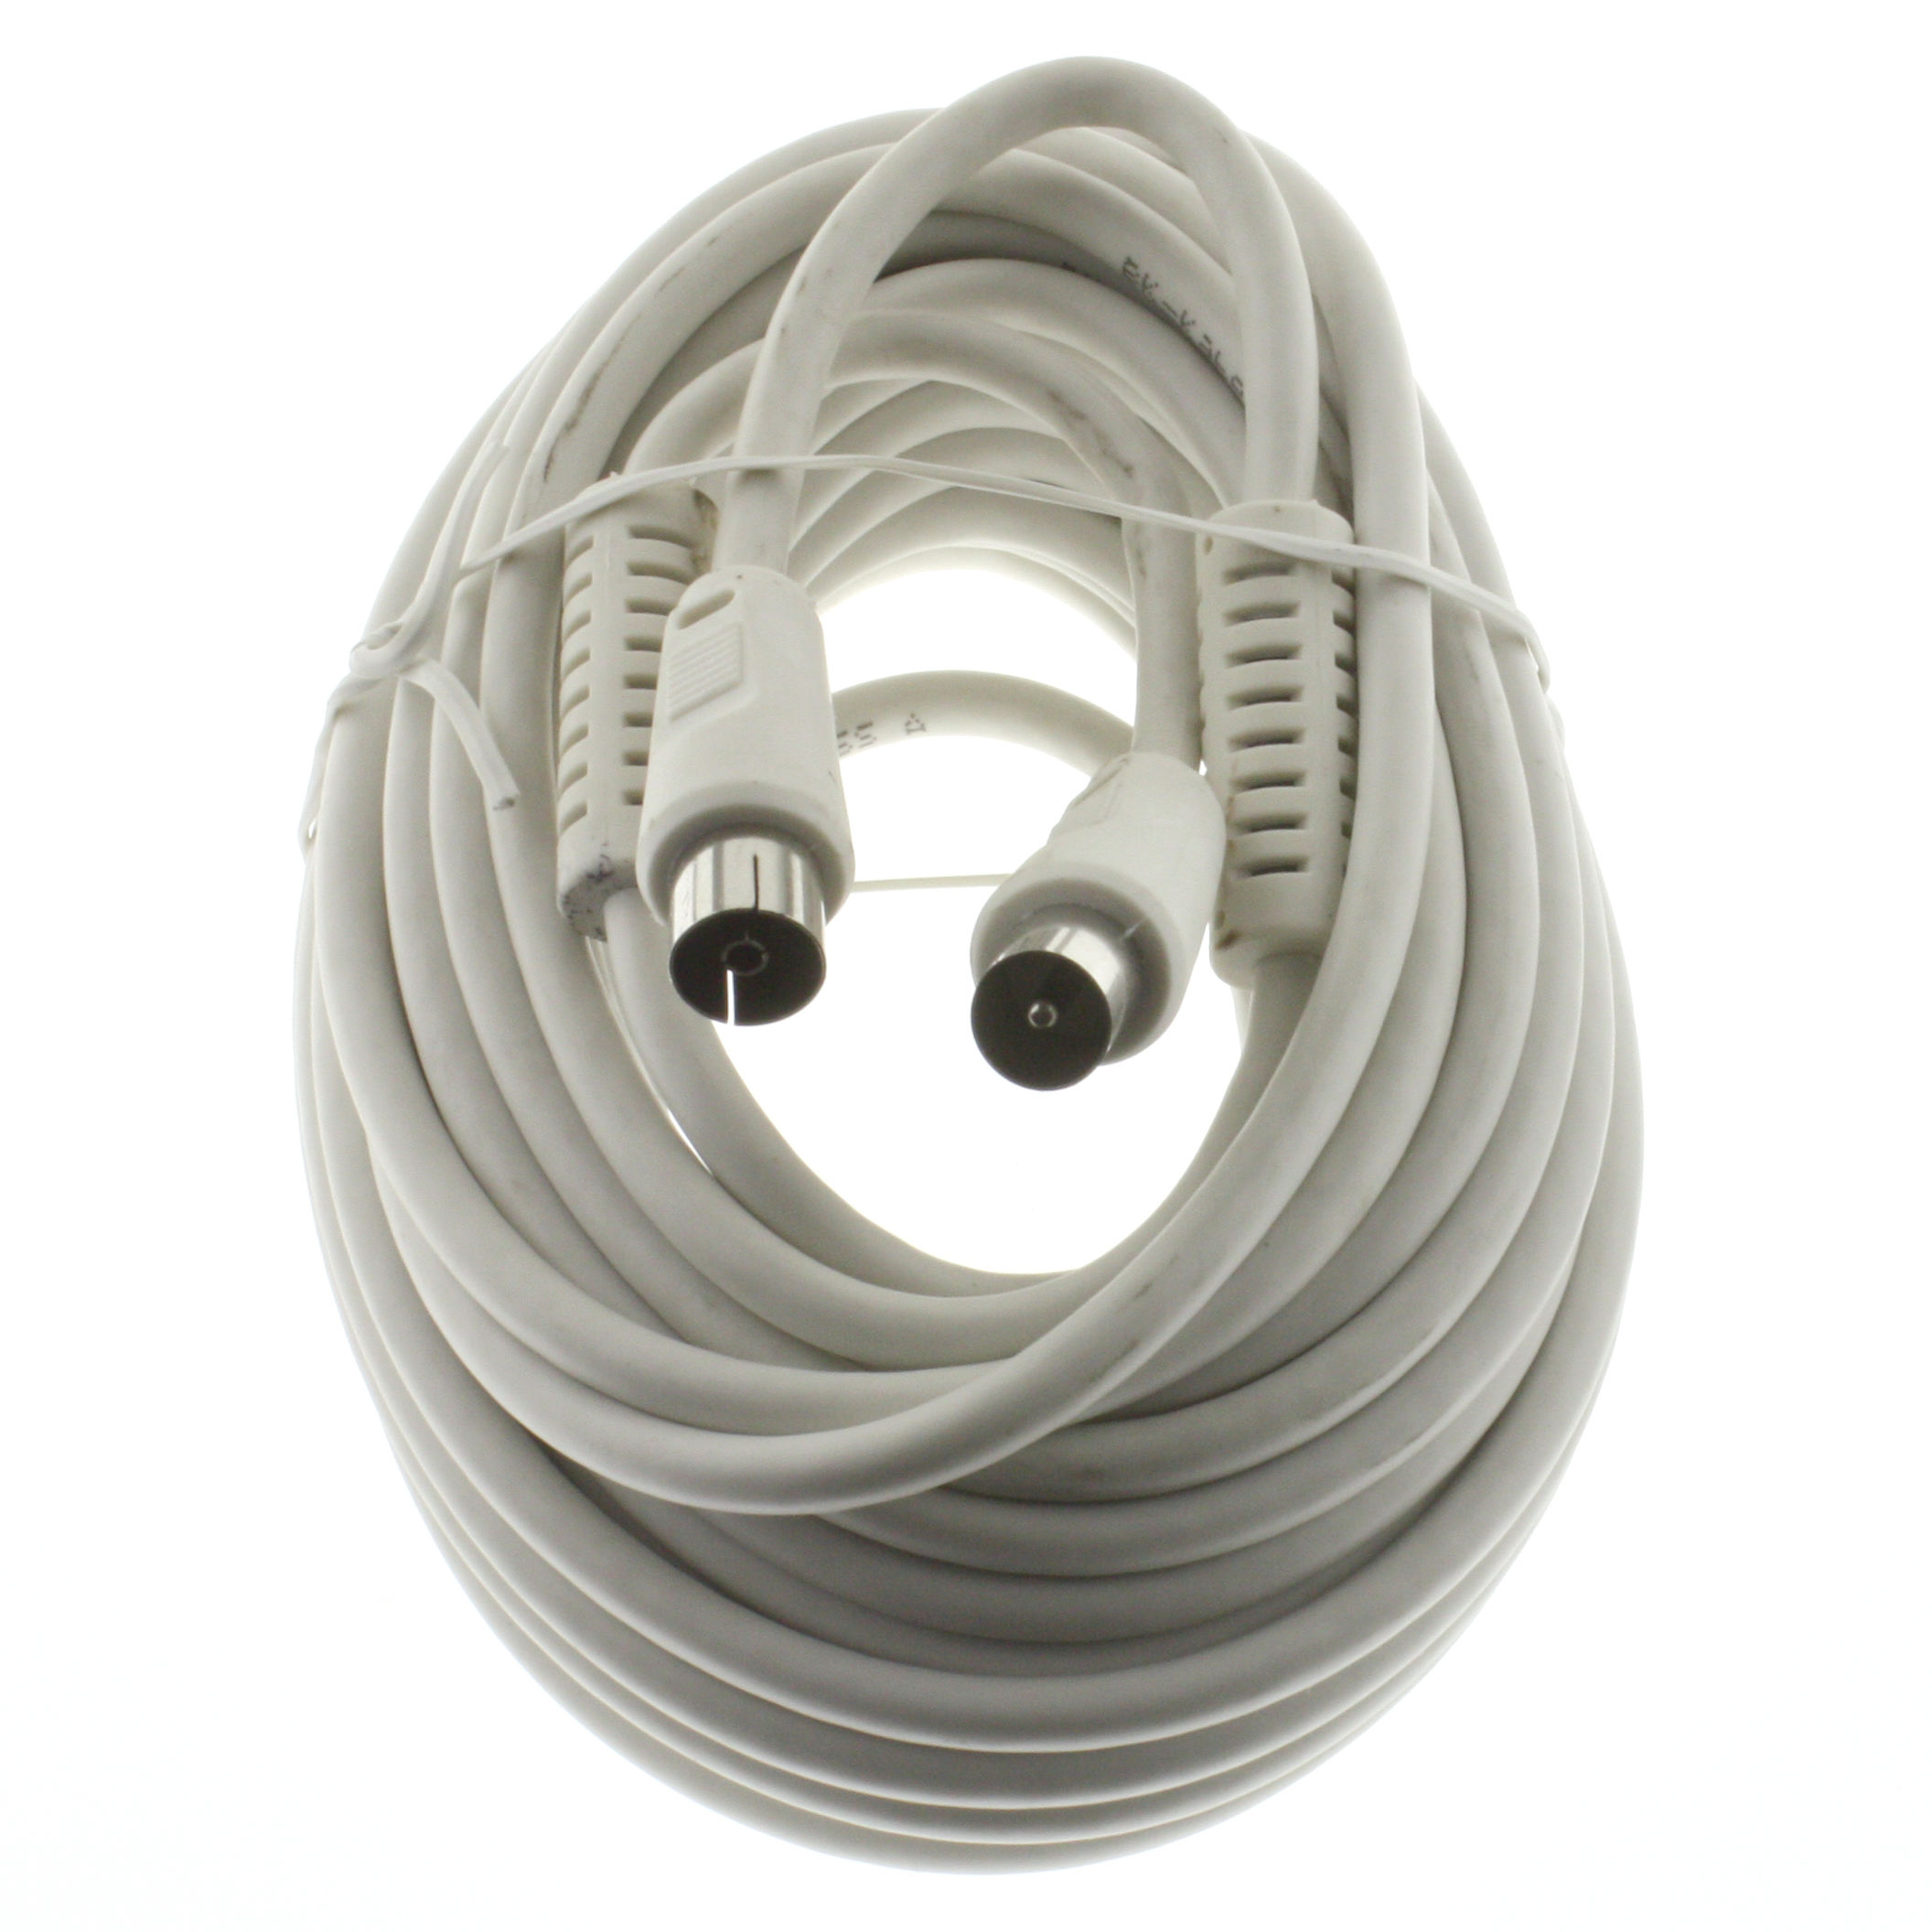 Antenna cable with ferrits 10.0m